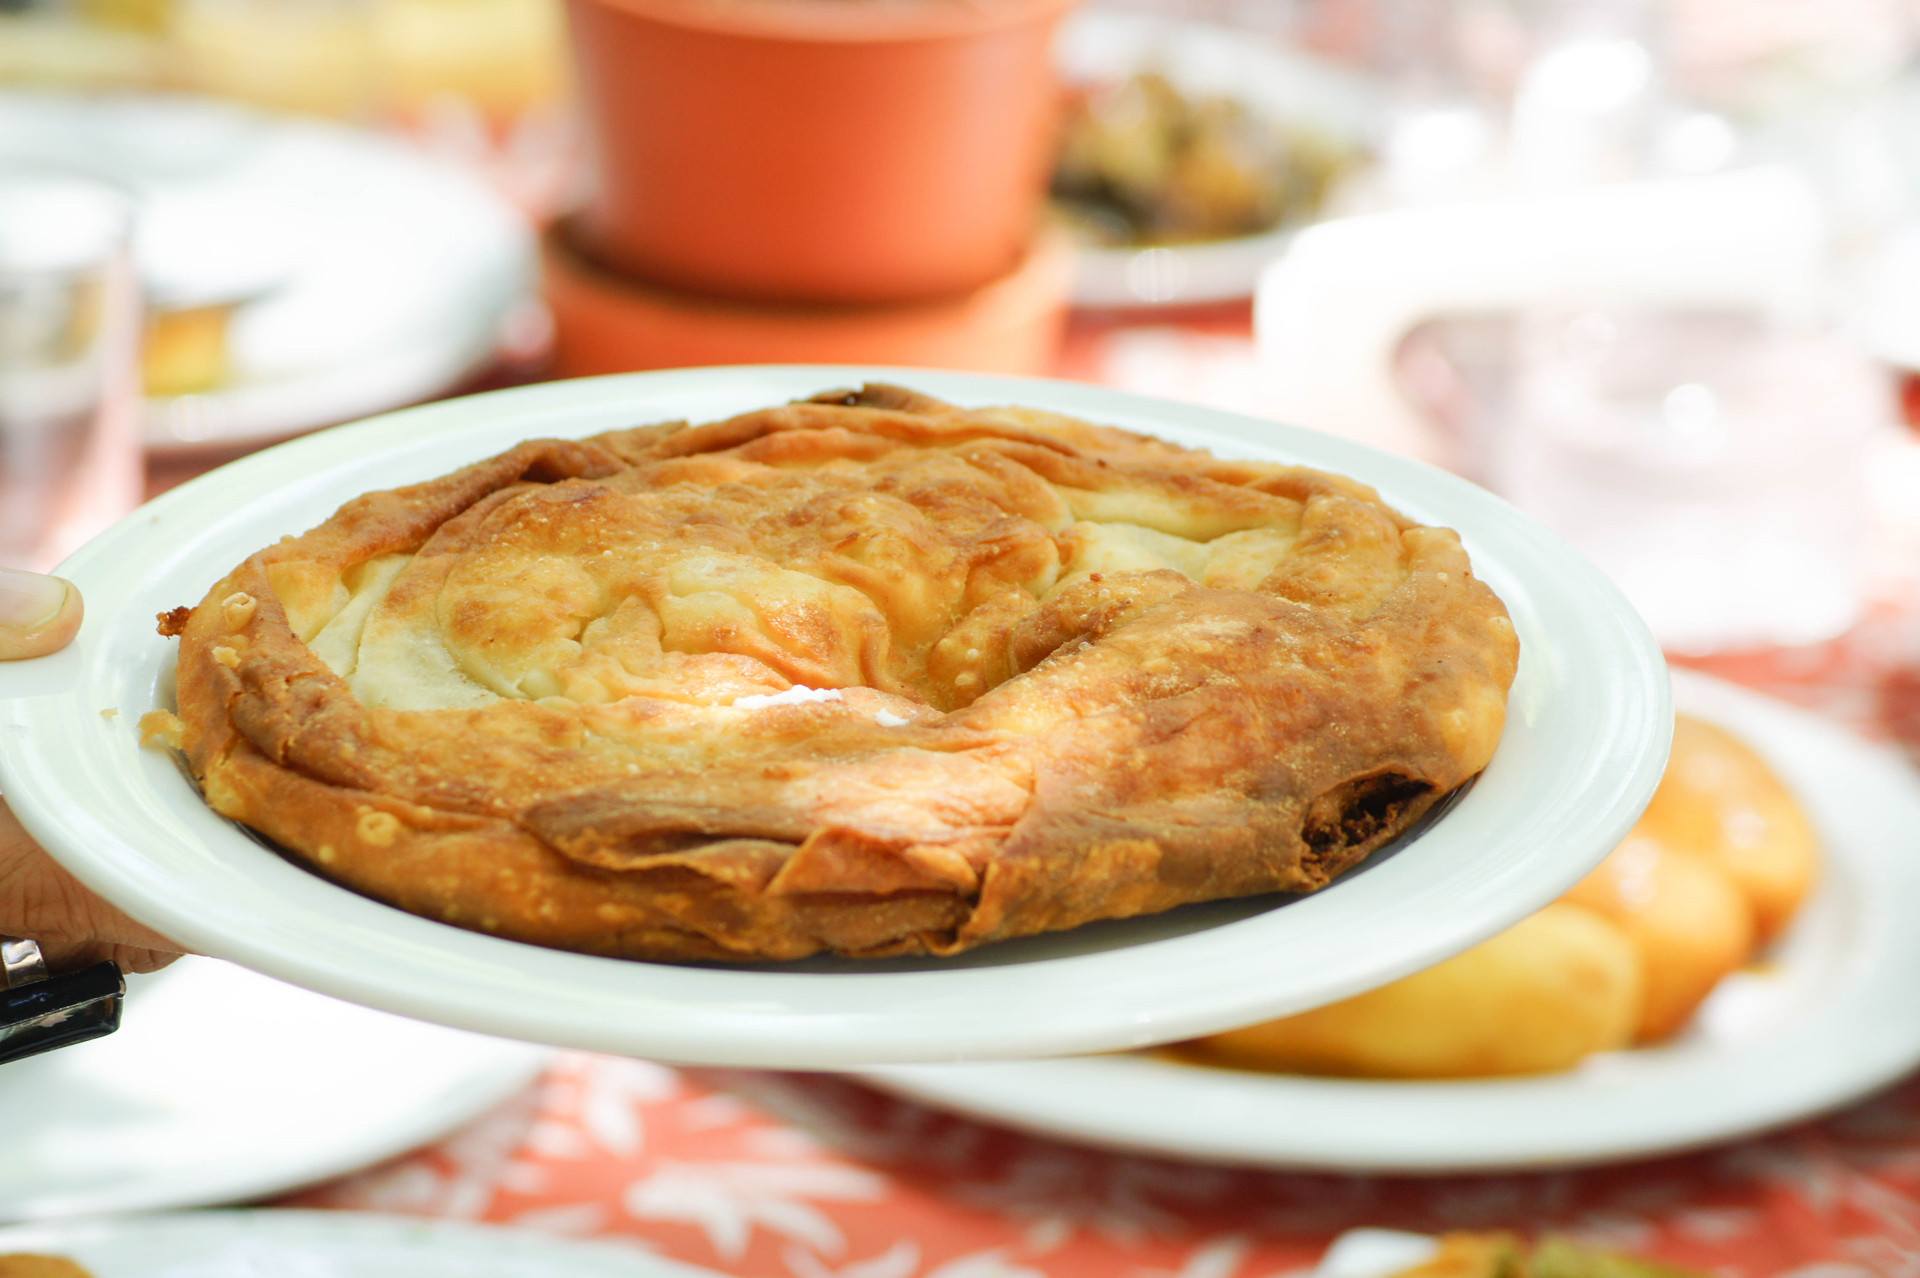 Cheese pies are a local delicacy in Skopelos